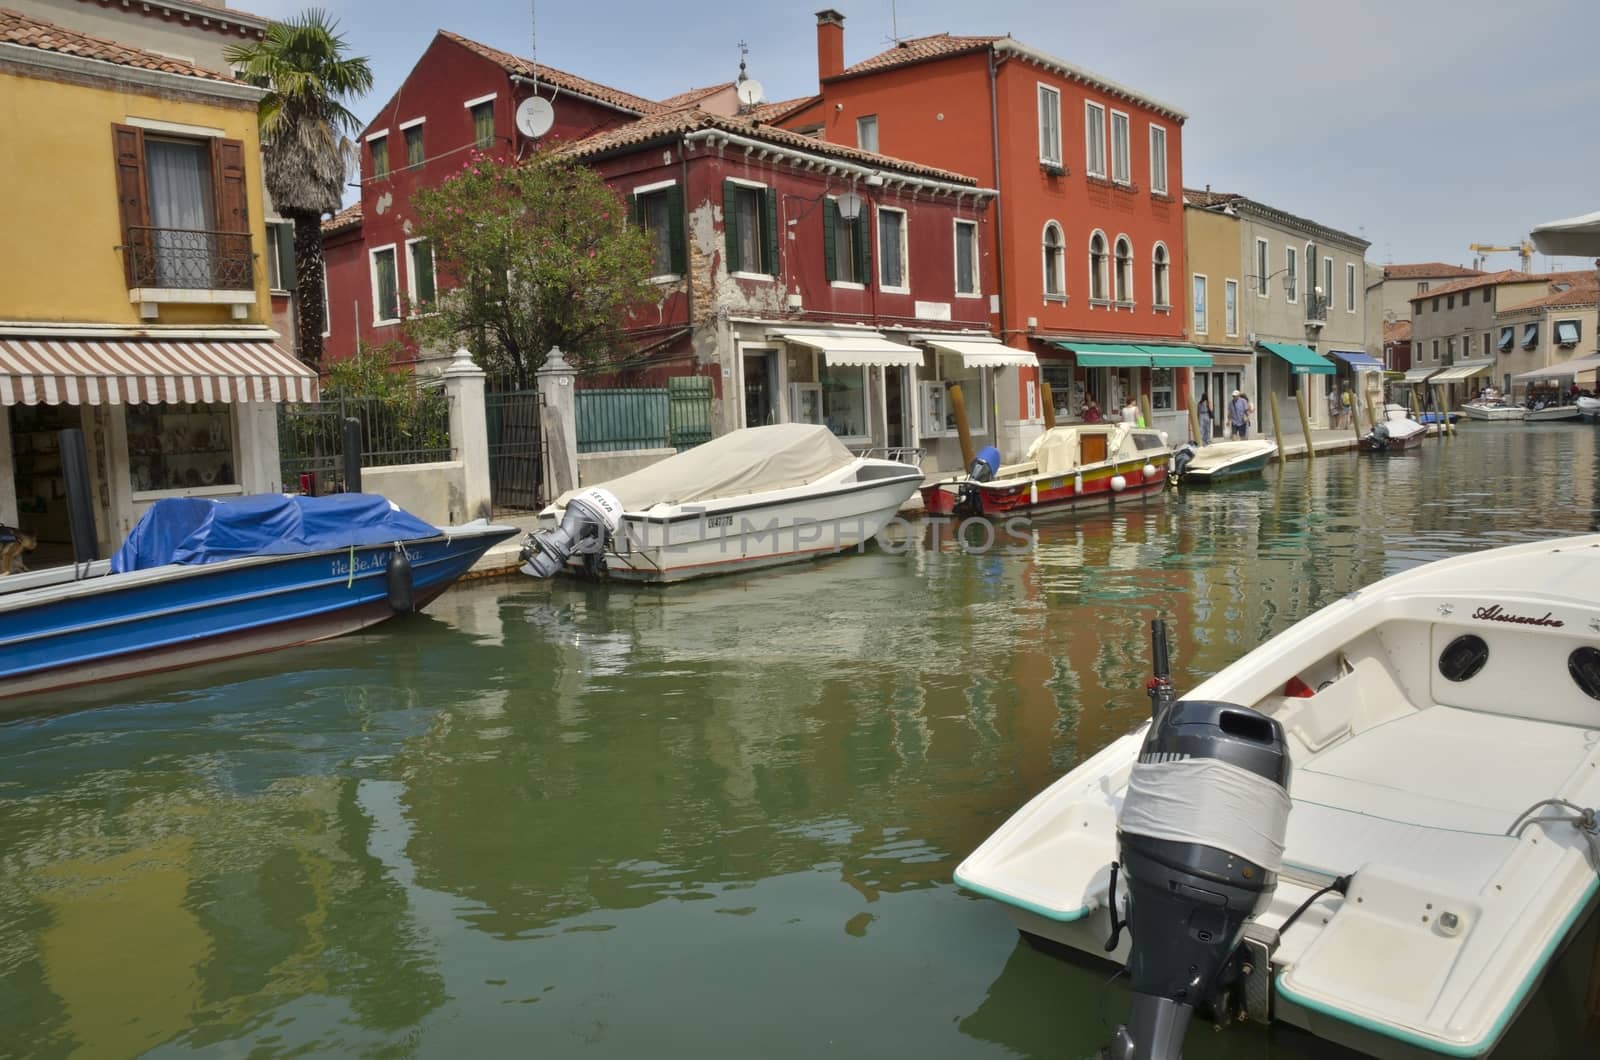 Channel in Murano island by monysasi